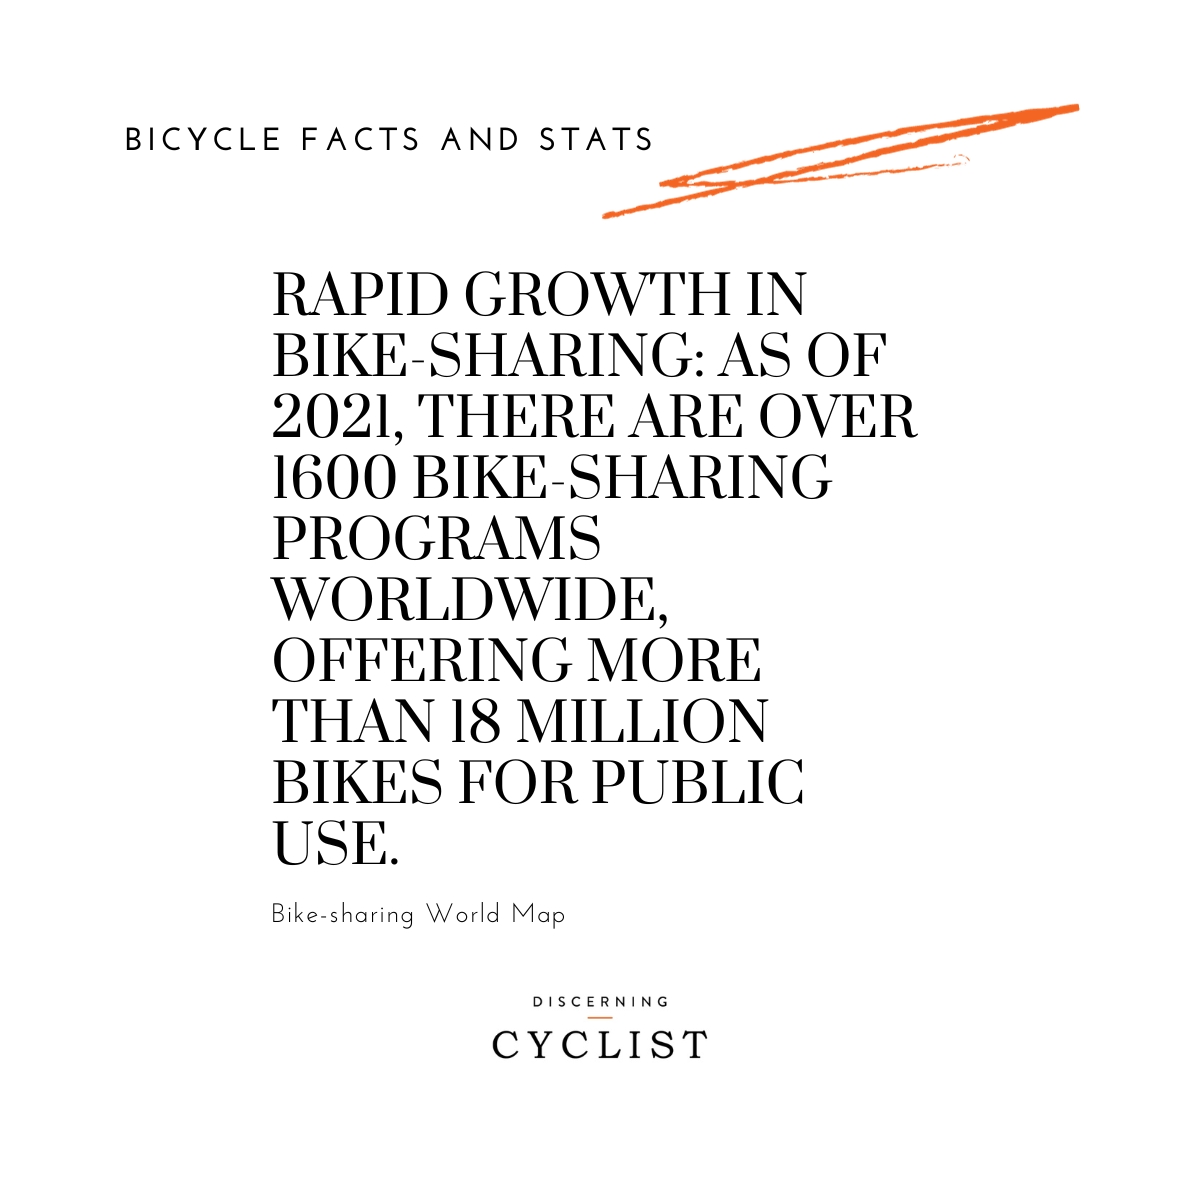 Rapid Growth in Bike-Sharing: As of 2021, there are over 1600 bike-sharing programs worldwide, offering more than 18 million bikes for public use.